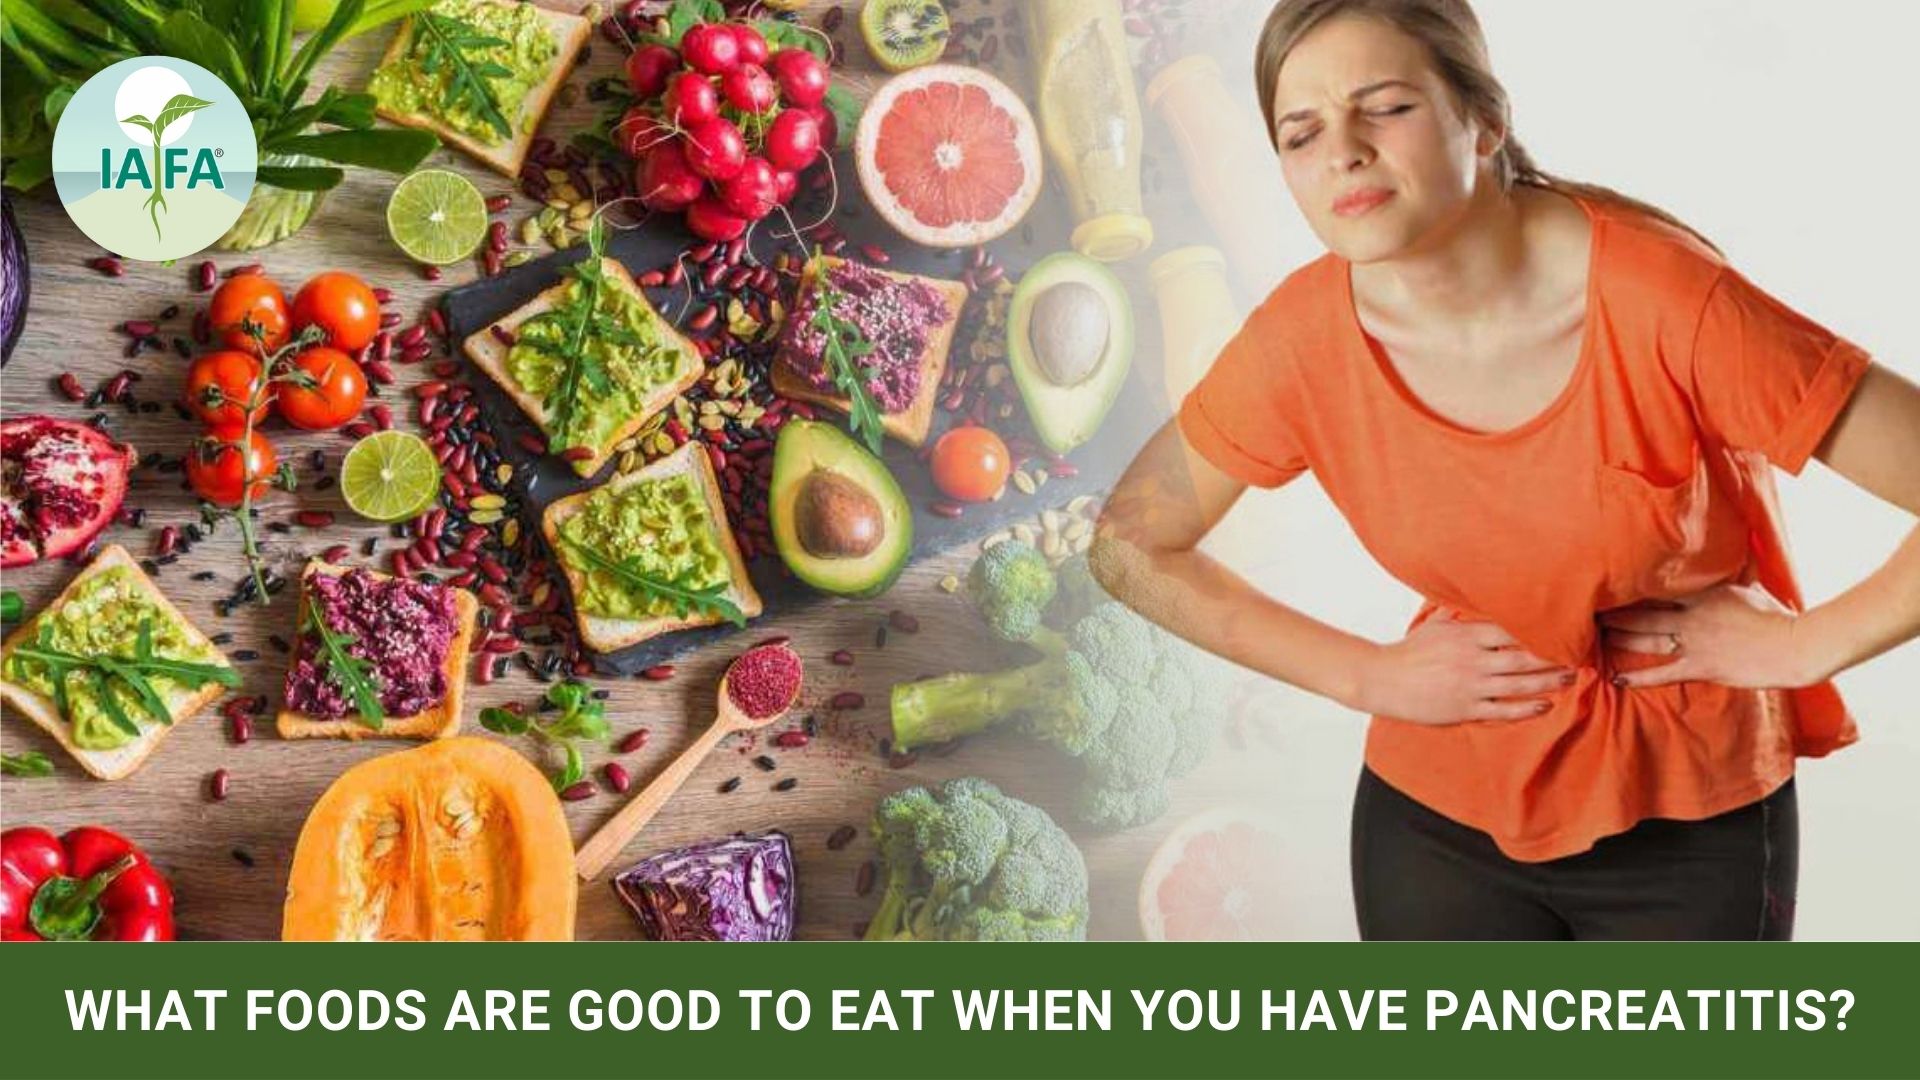 What Foods are Good to Eat When You Have Pancreatitis?